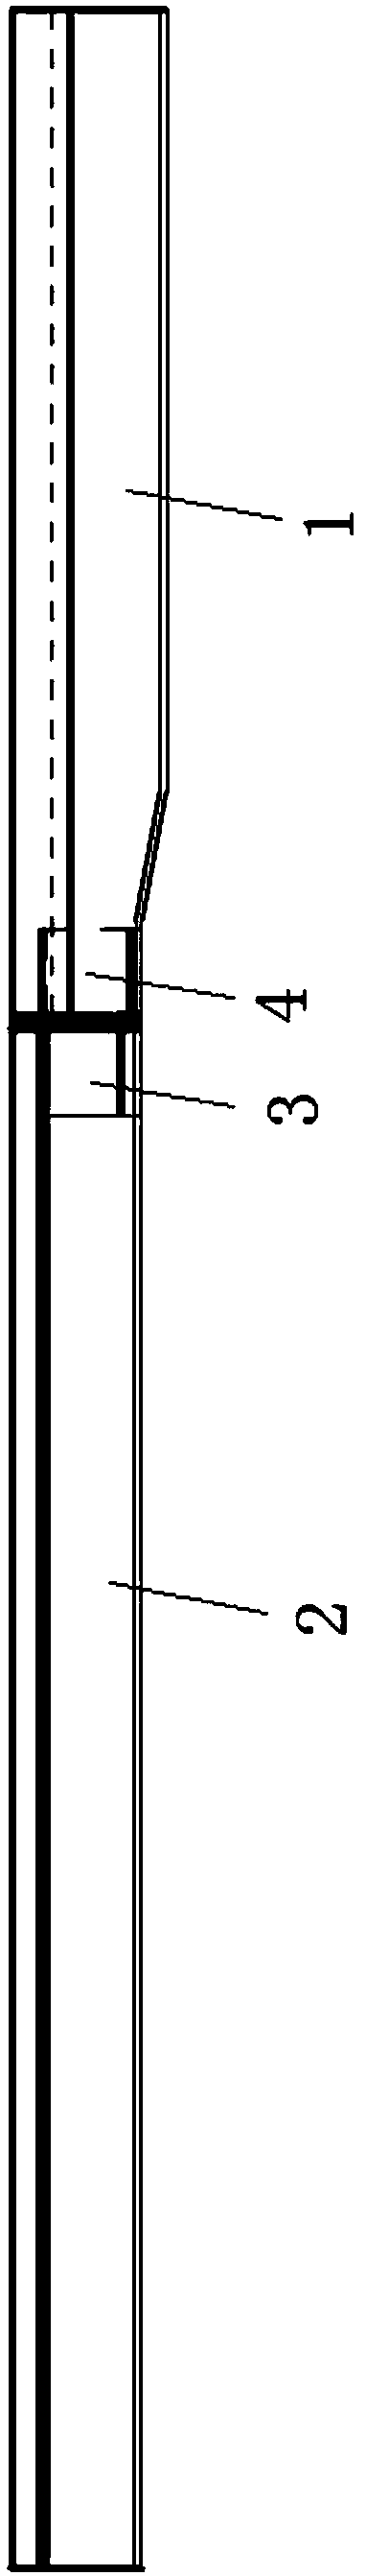 A trough rail and I-rail connecting structure and welding method